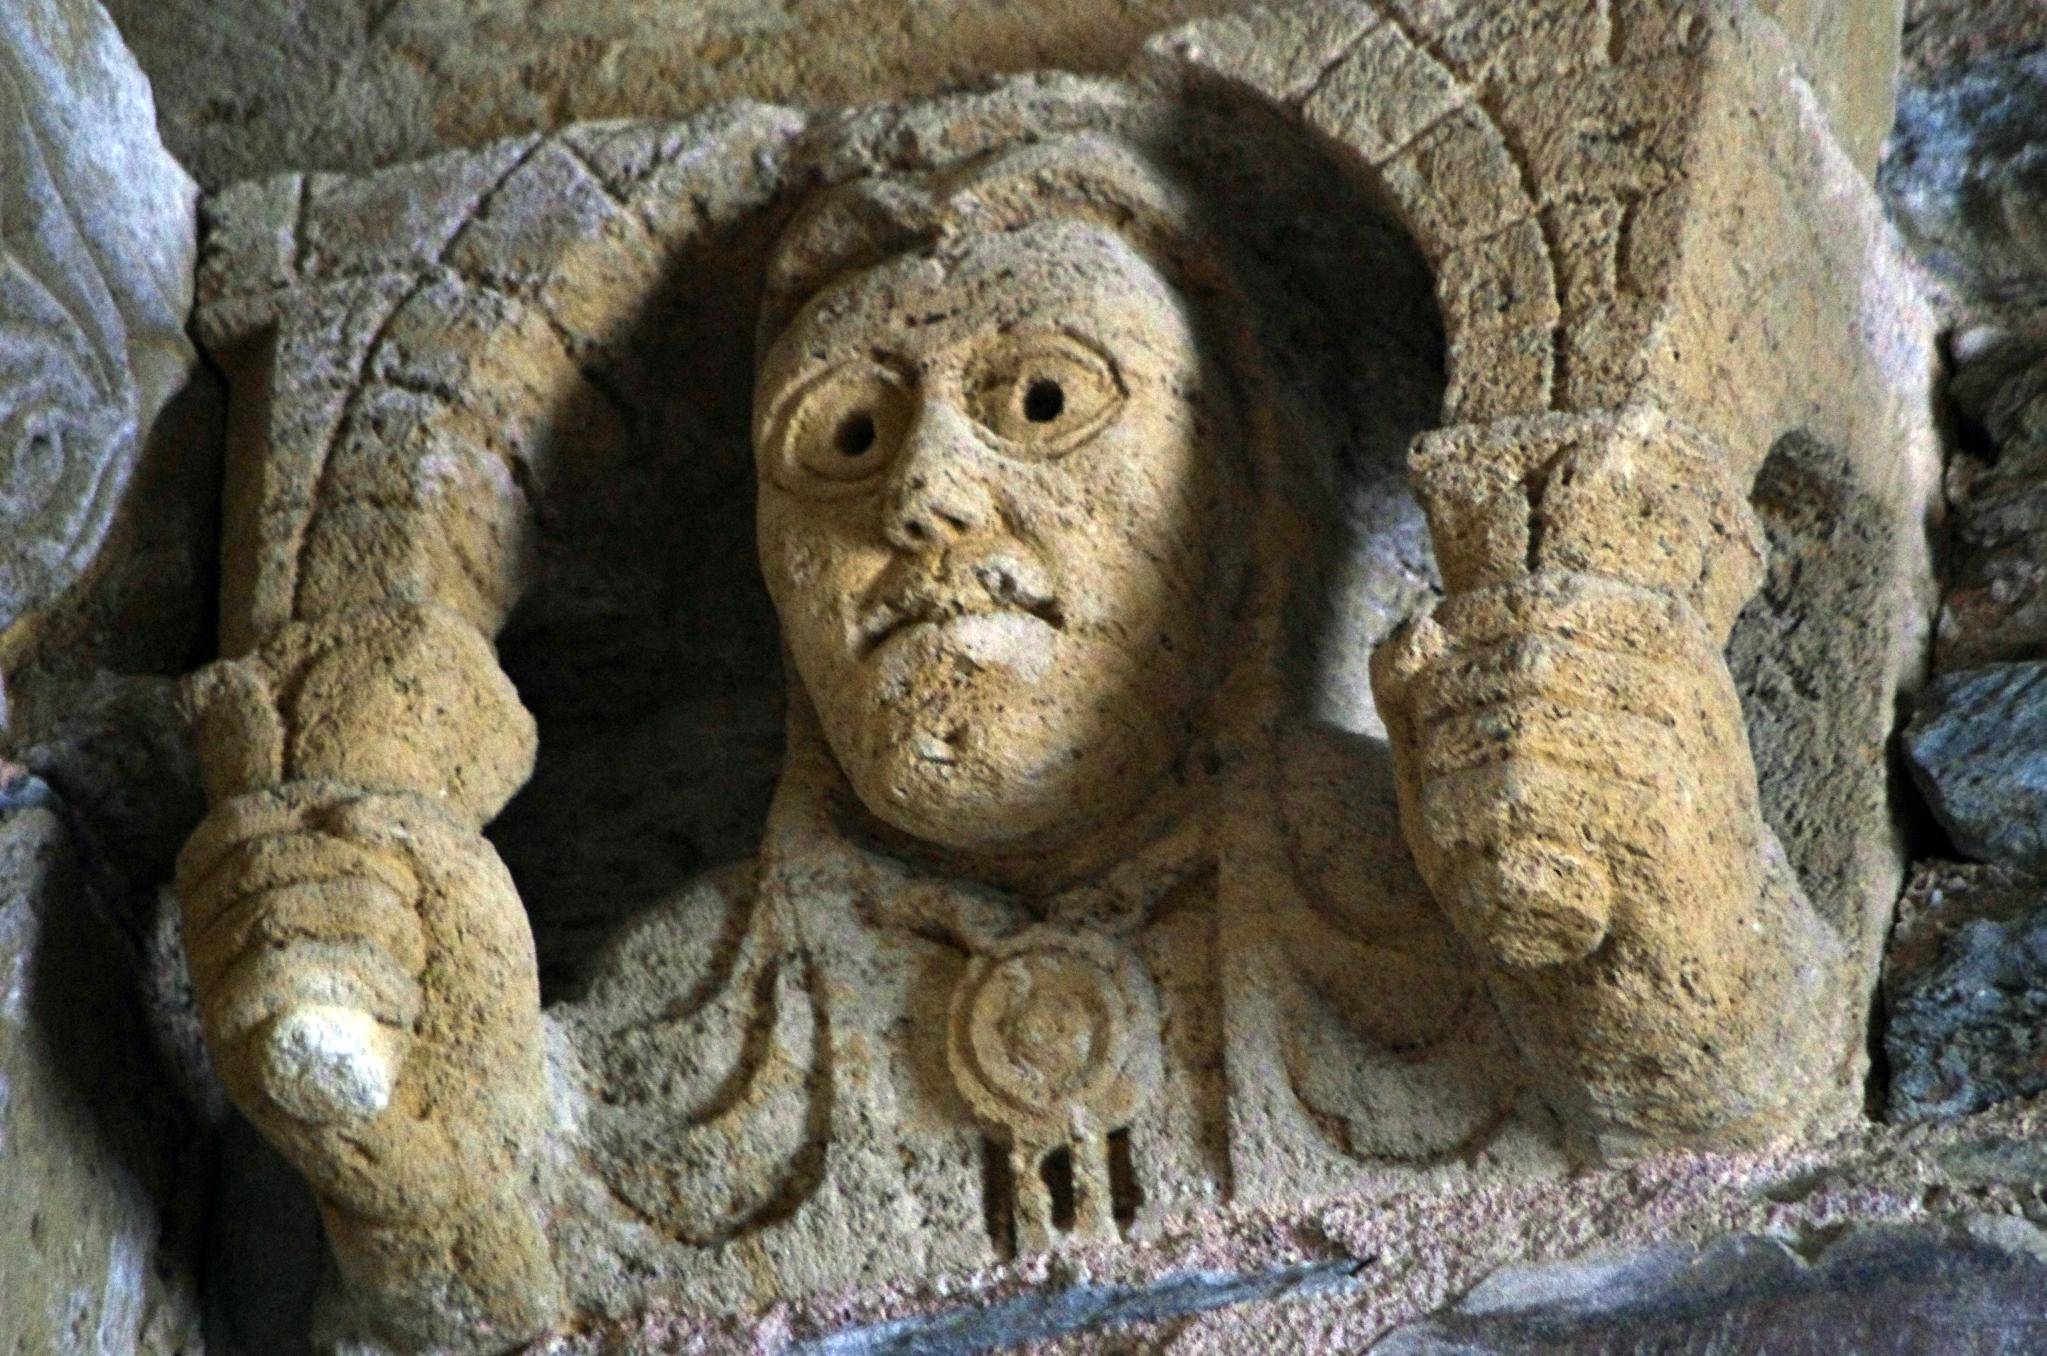 stone face carving is shown in a cave